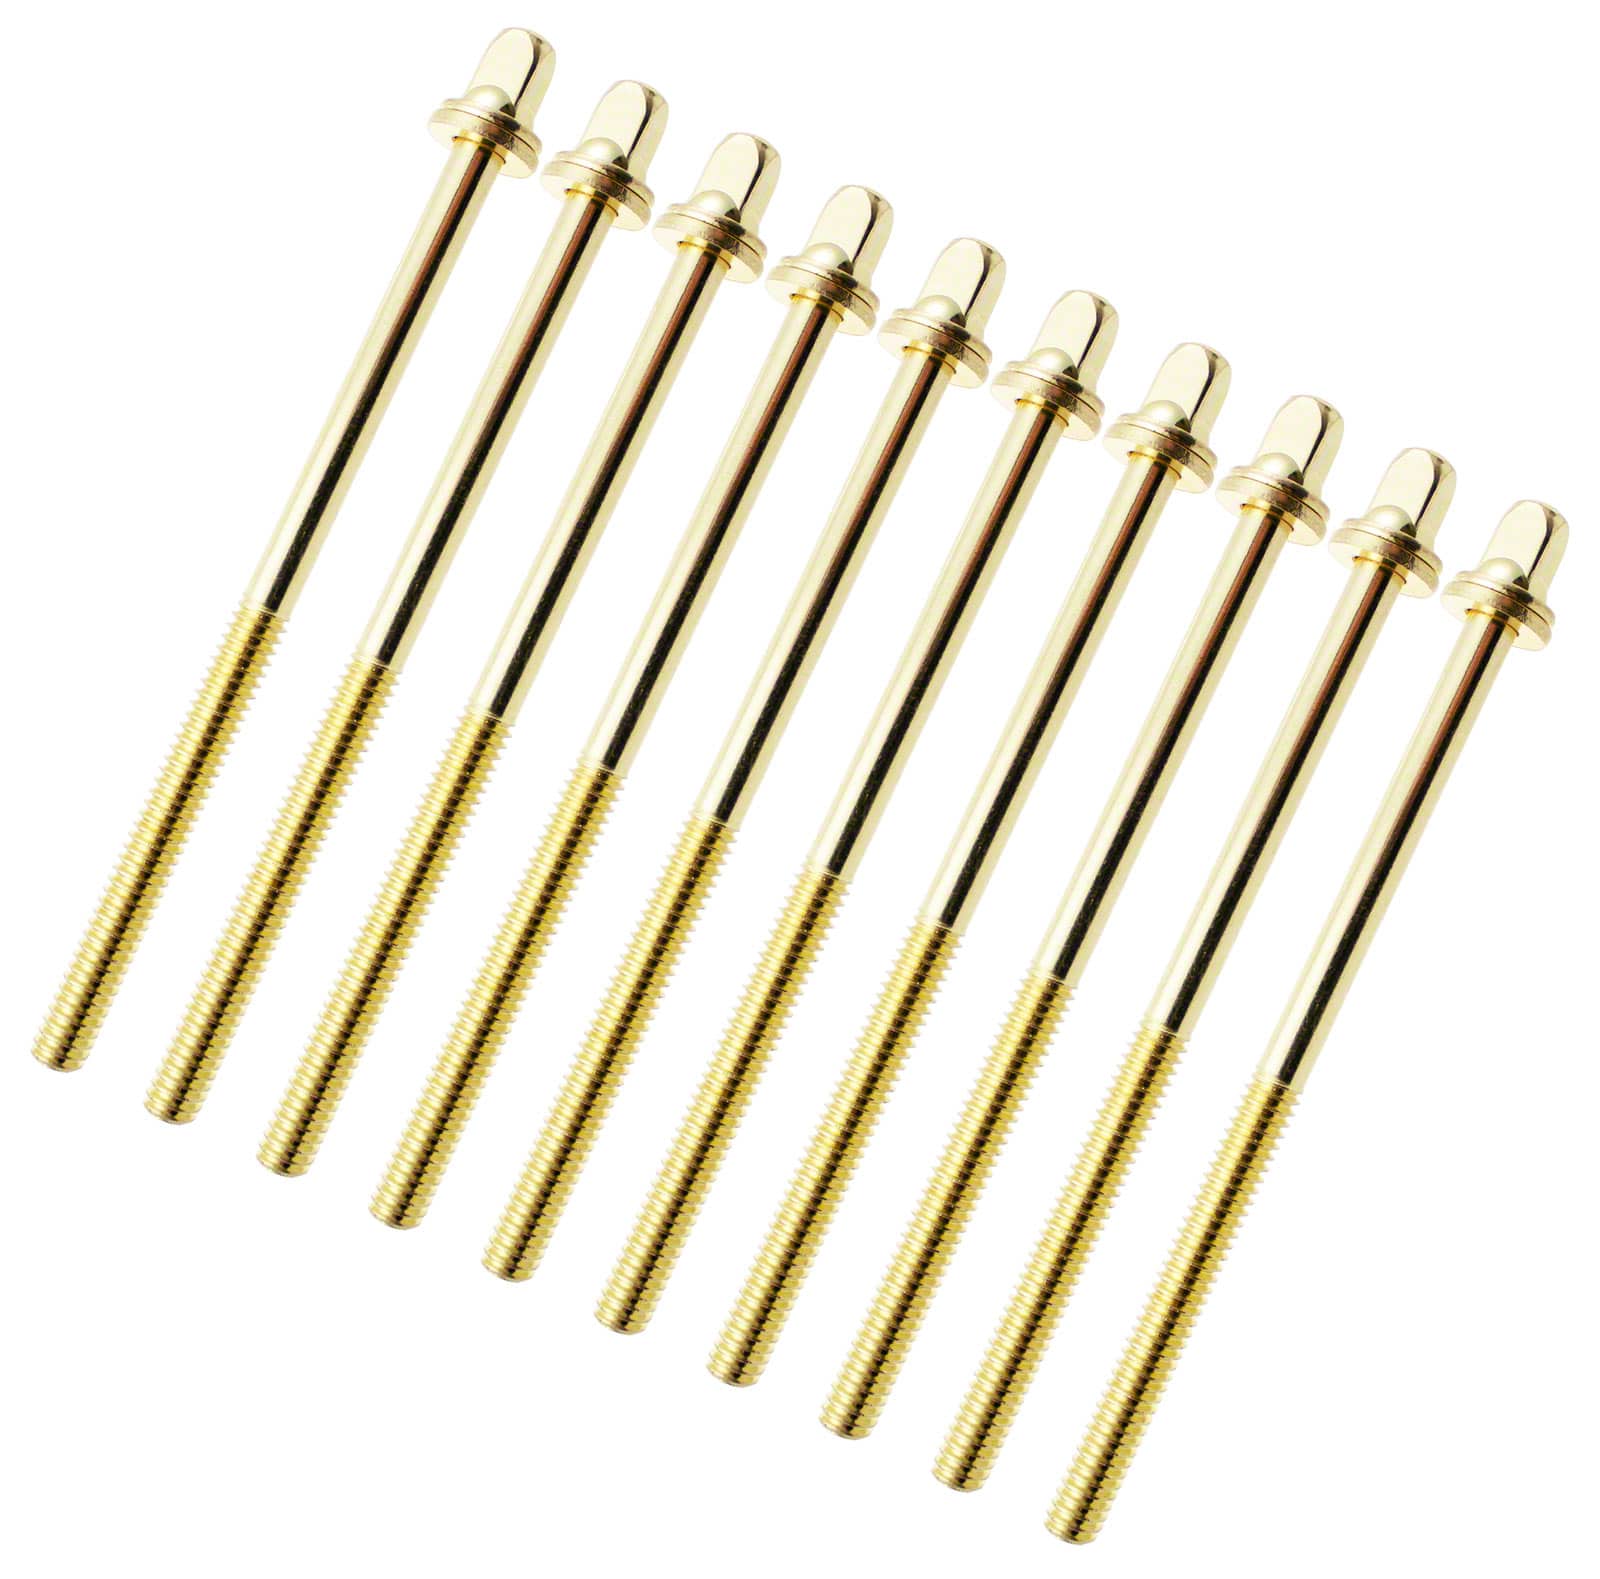 SPAREDRUM TRC-90W-BR - 90MM TENSION ROD BRASS WITH WASHER - 7/32